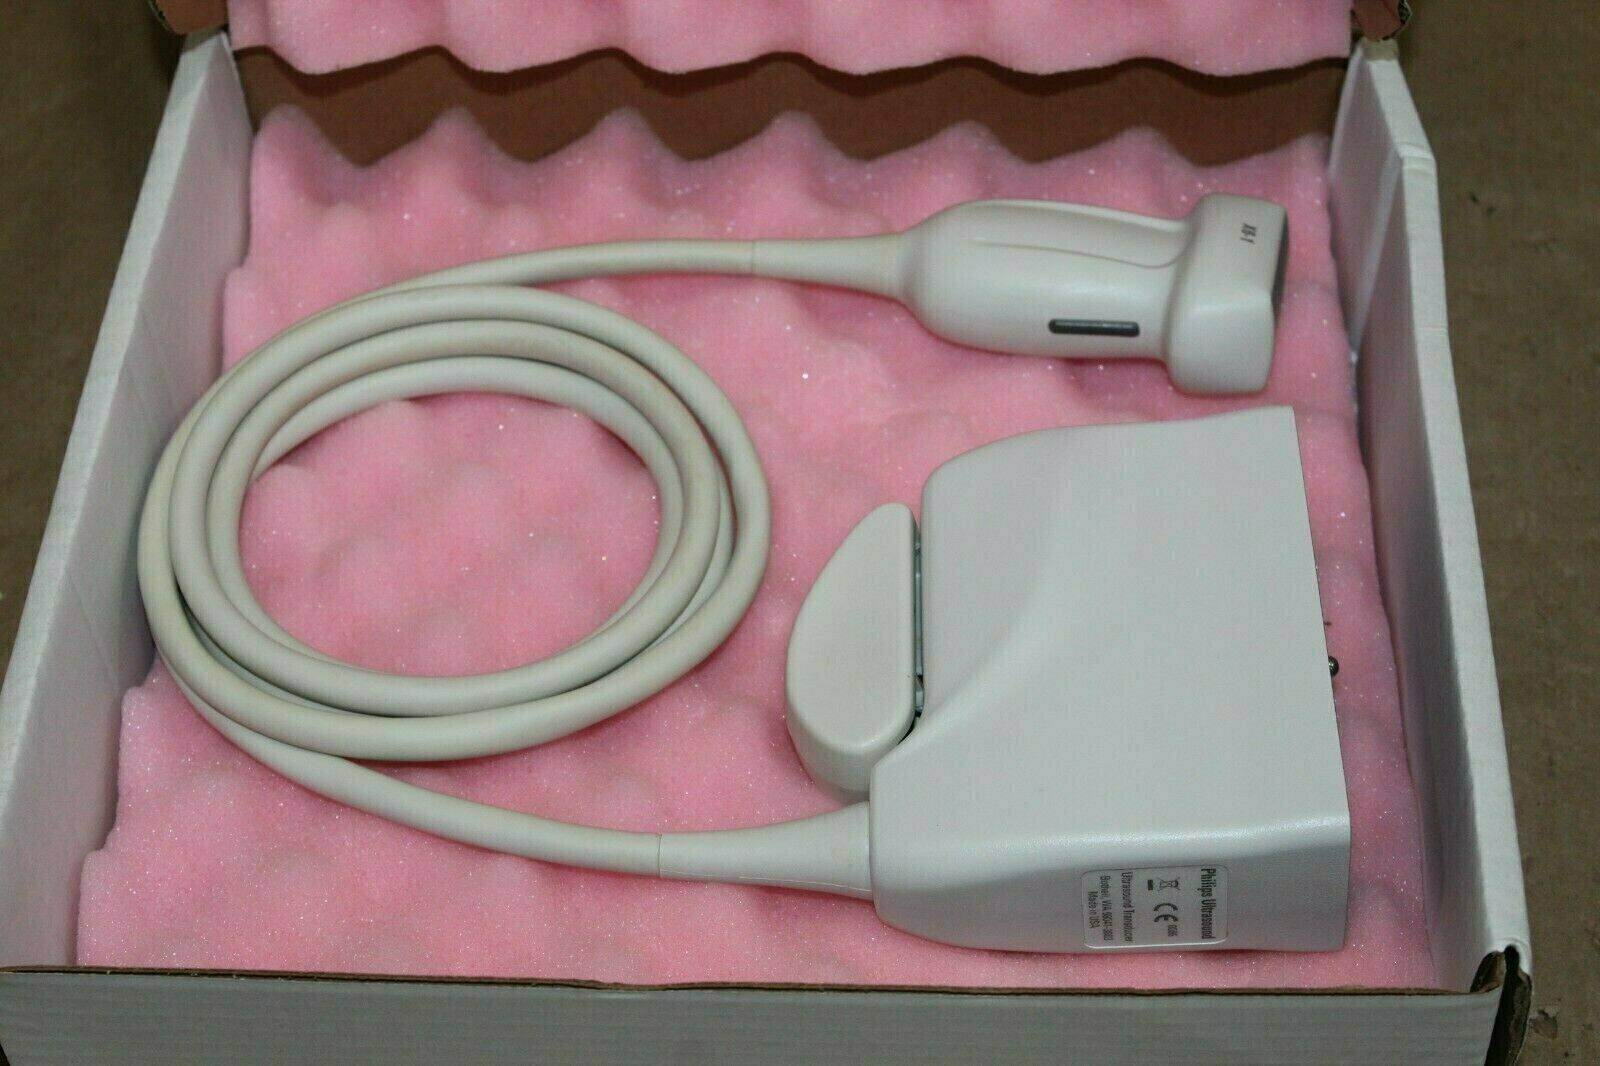 Philips X6-1 Ultrasound Transducer Probe -Good Condition DIAGNOSTIC ULTRASOUND MACHINES FOR SALE